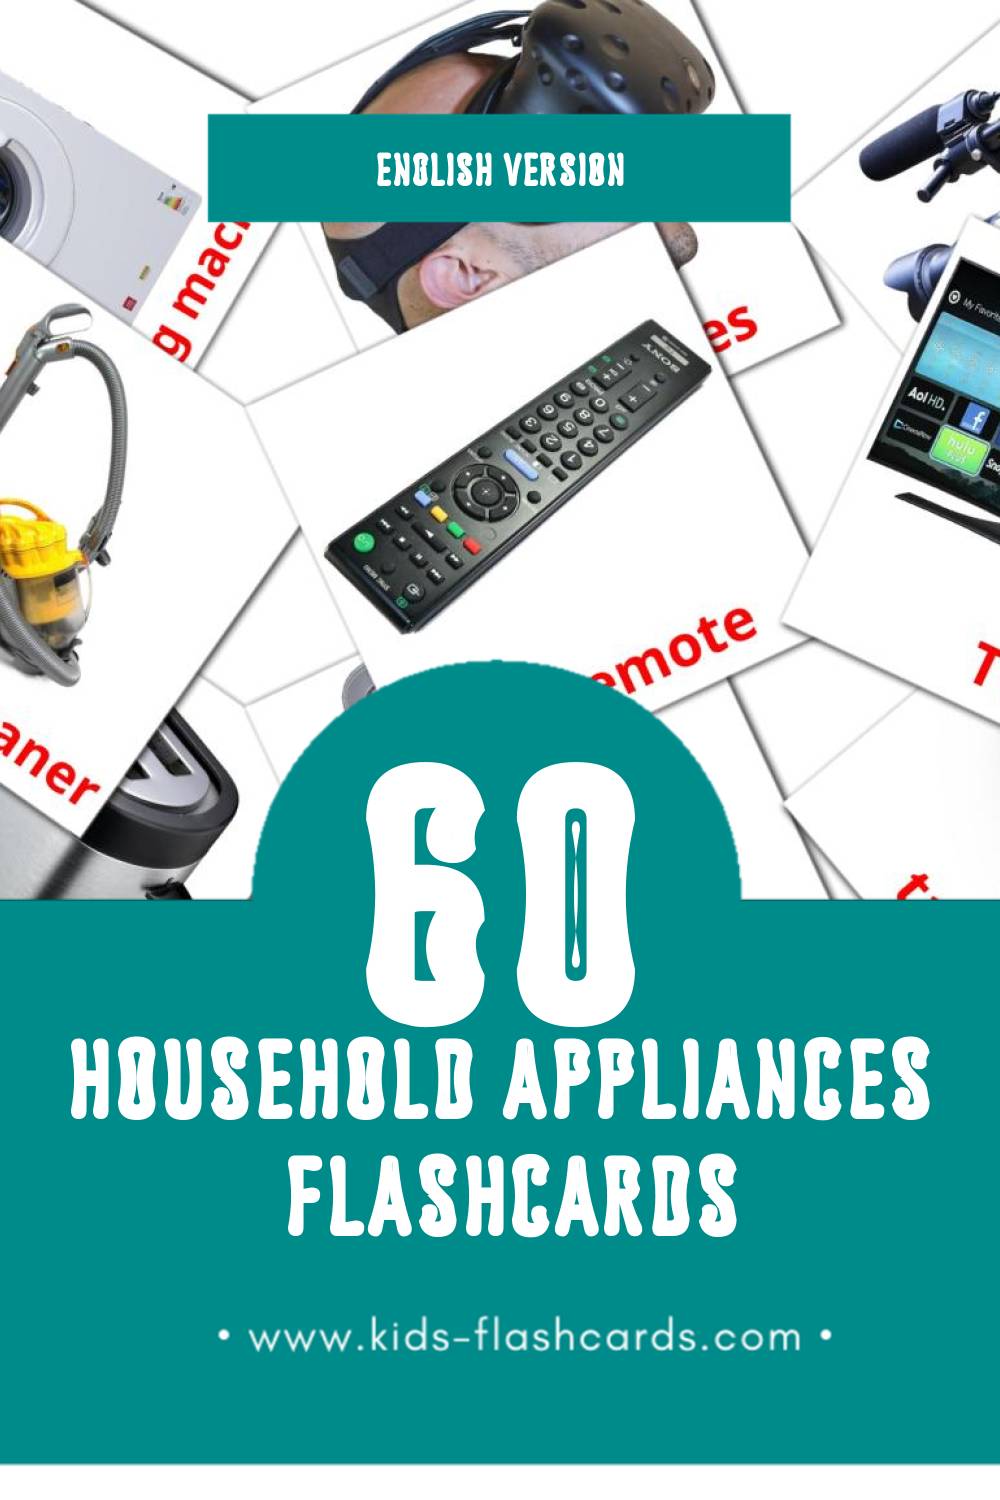 Visual Household Appliances Flashcards for Toddlers (60 cards in English)